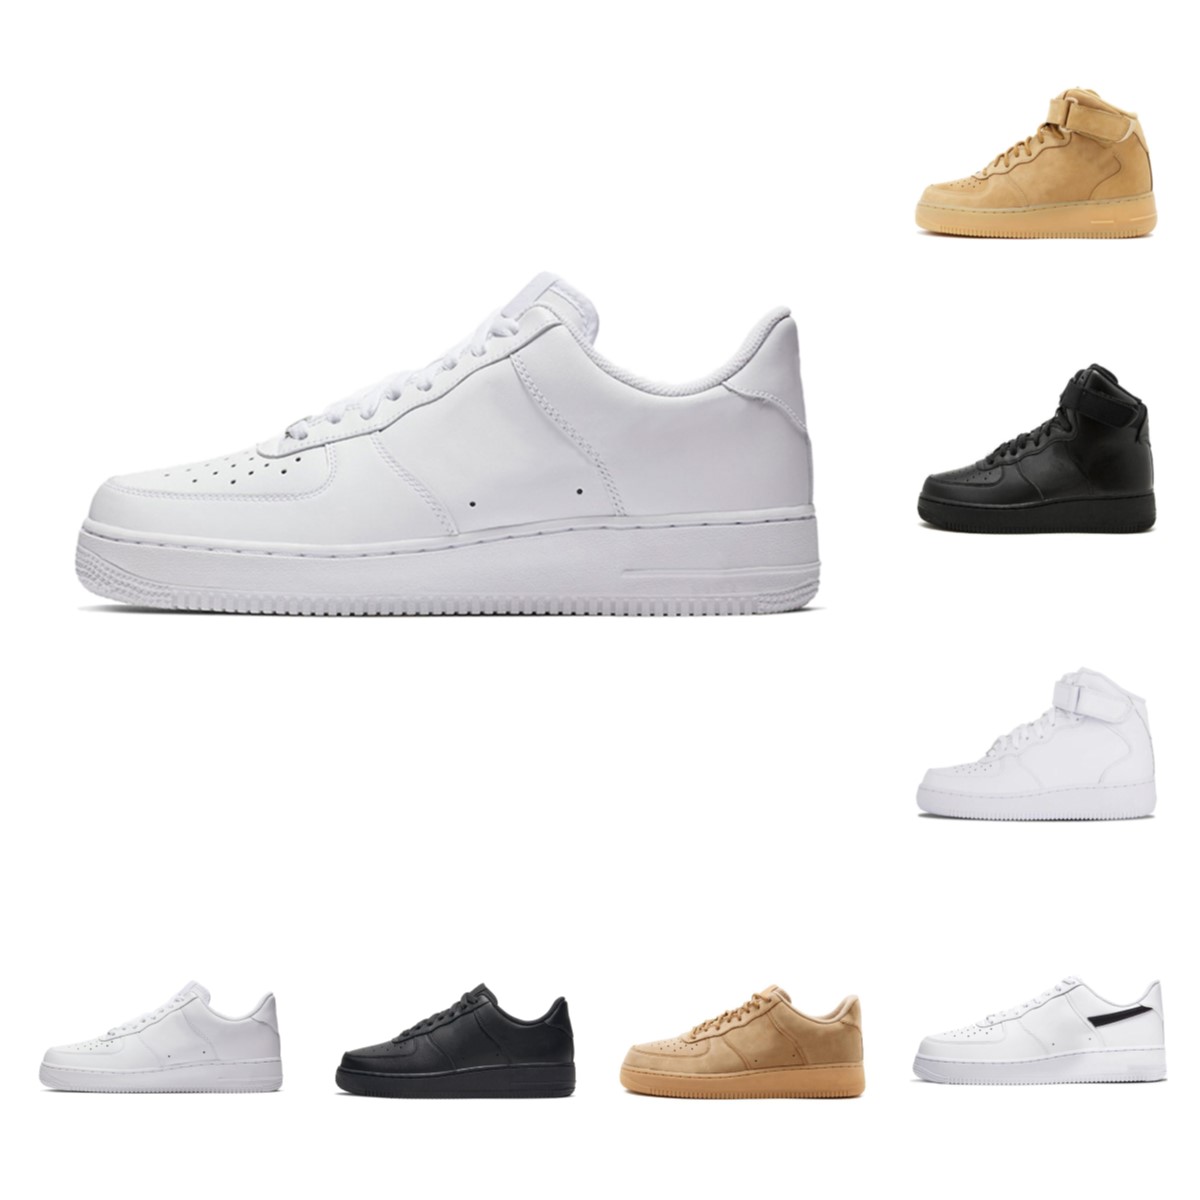 Qualité 2022 NewForces Men Low Skateboard Shoes Discing One Unisexe 1 07 Tricot Euro Airs Wheat Femmes All White Black Designers Outdoor Sports Sneakers